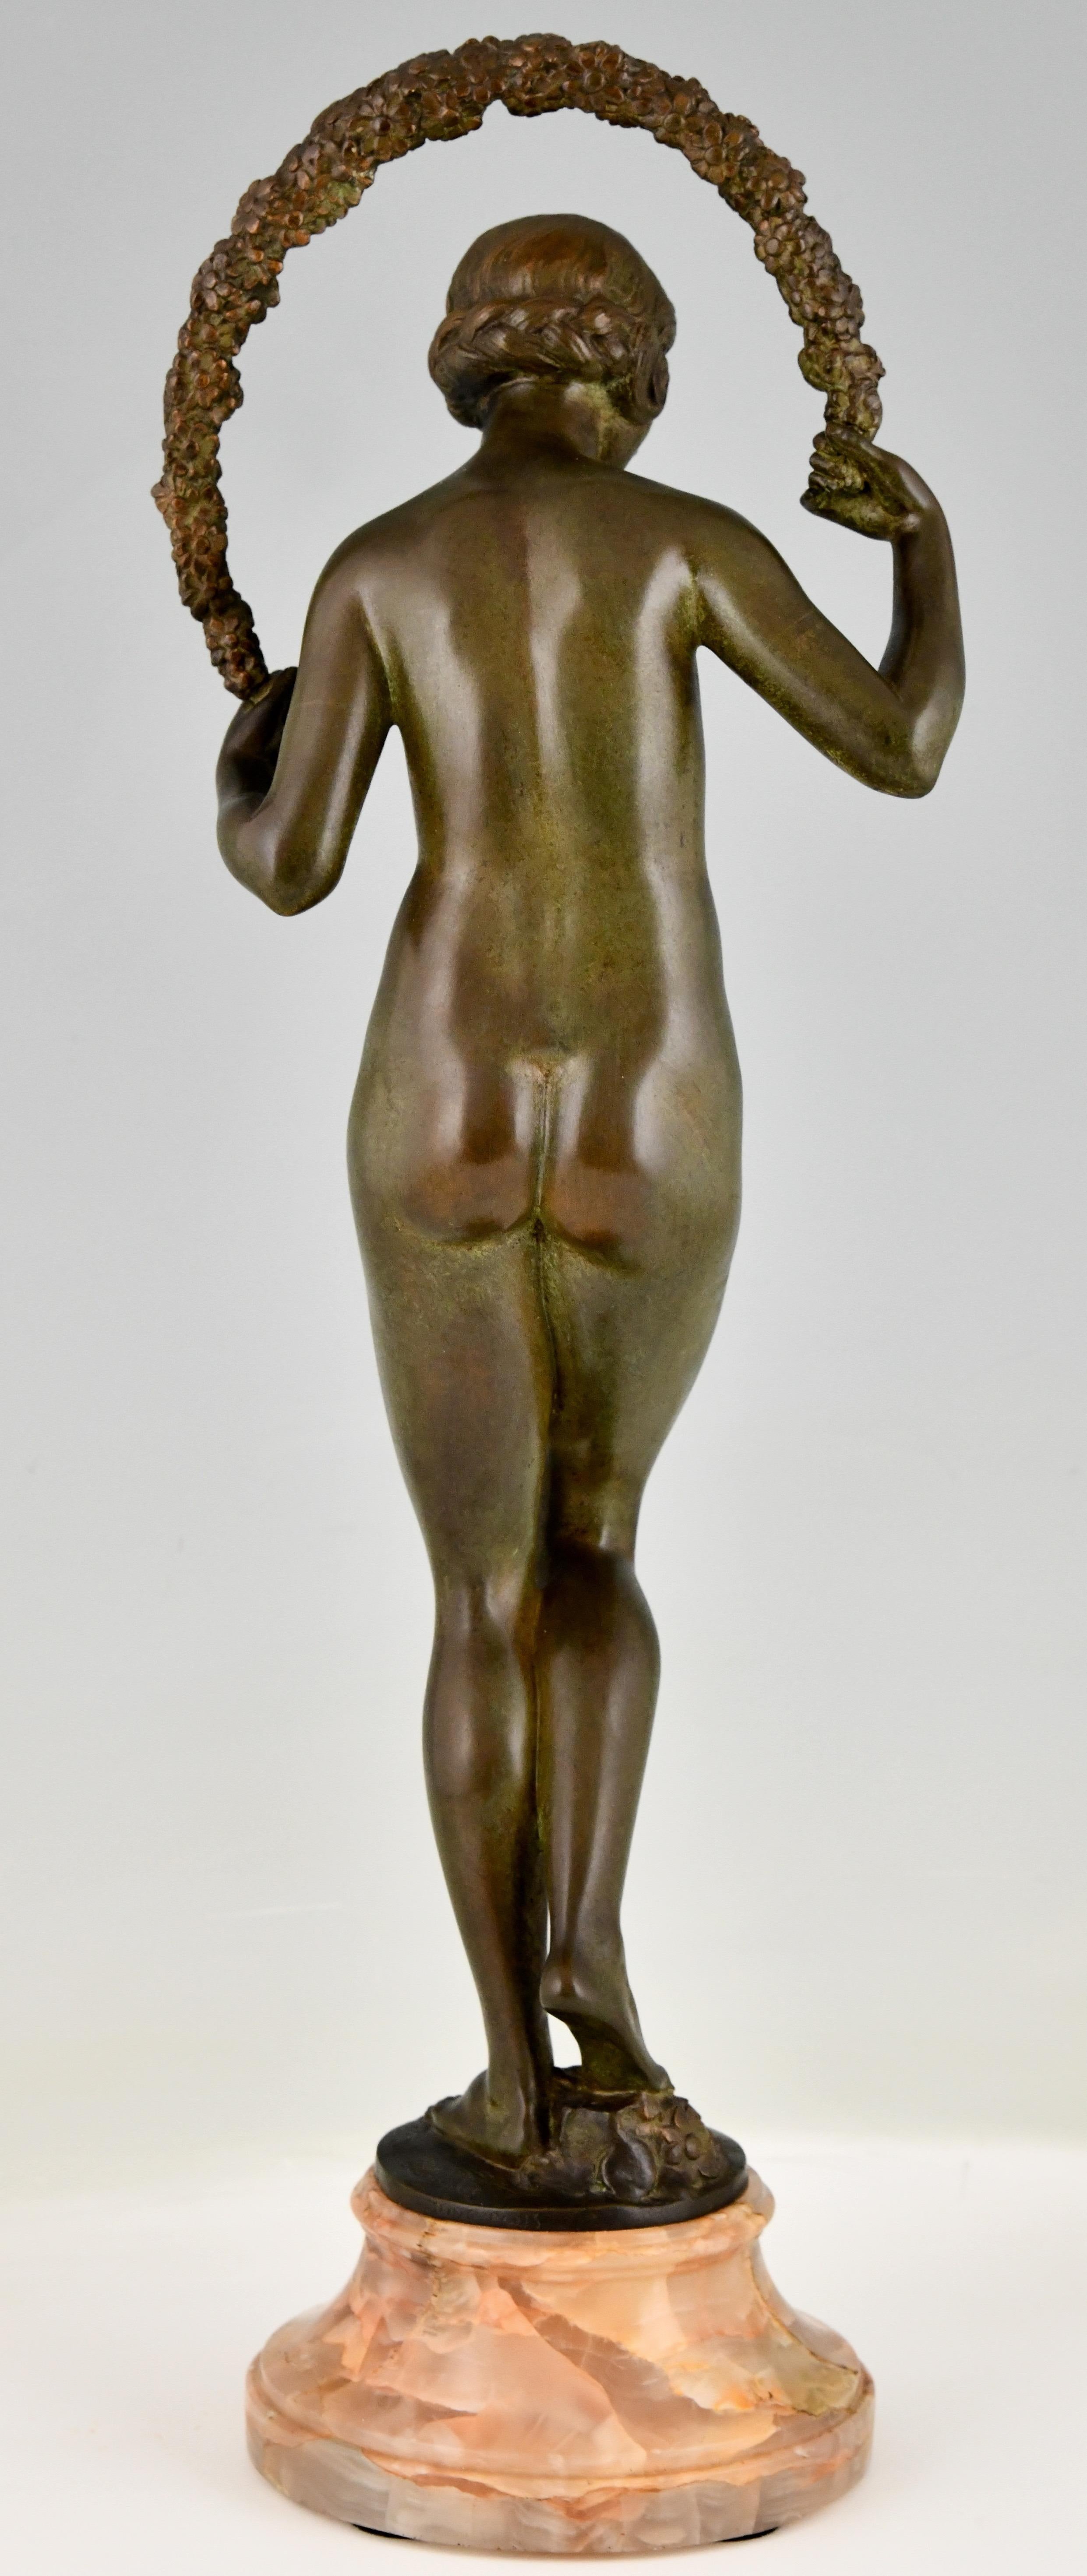 Early 20th Century Art Deco Bronze Sculpture Nude with Garland by Joe Descomps Cormier 1925 For Sale